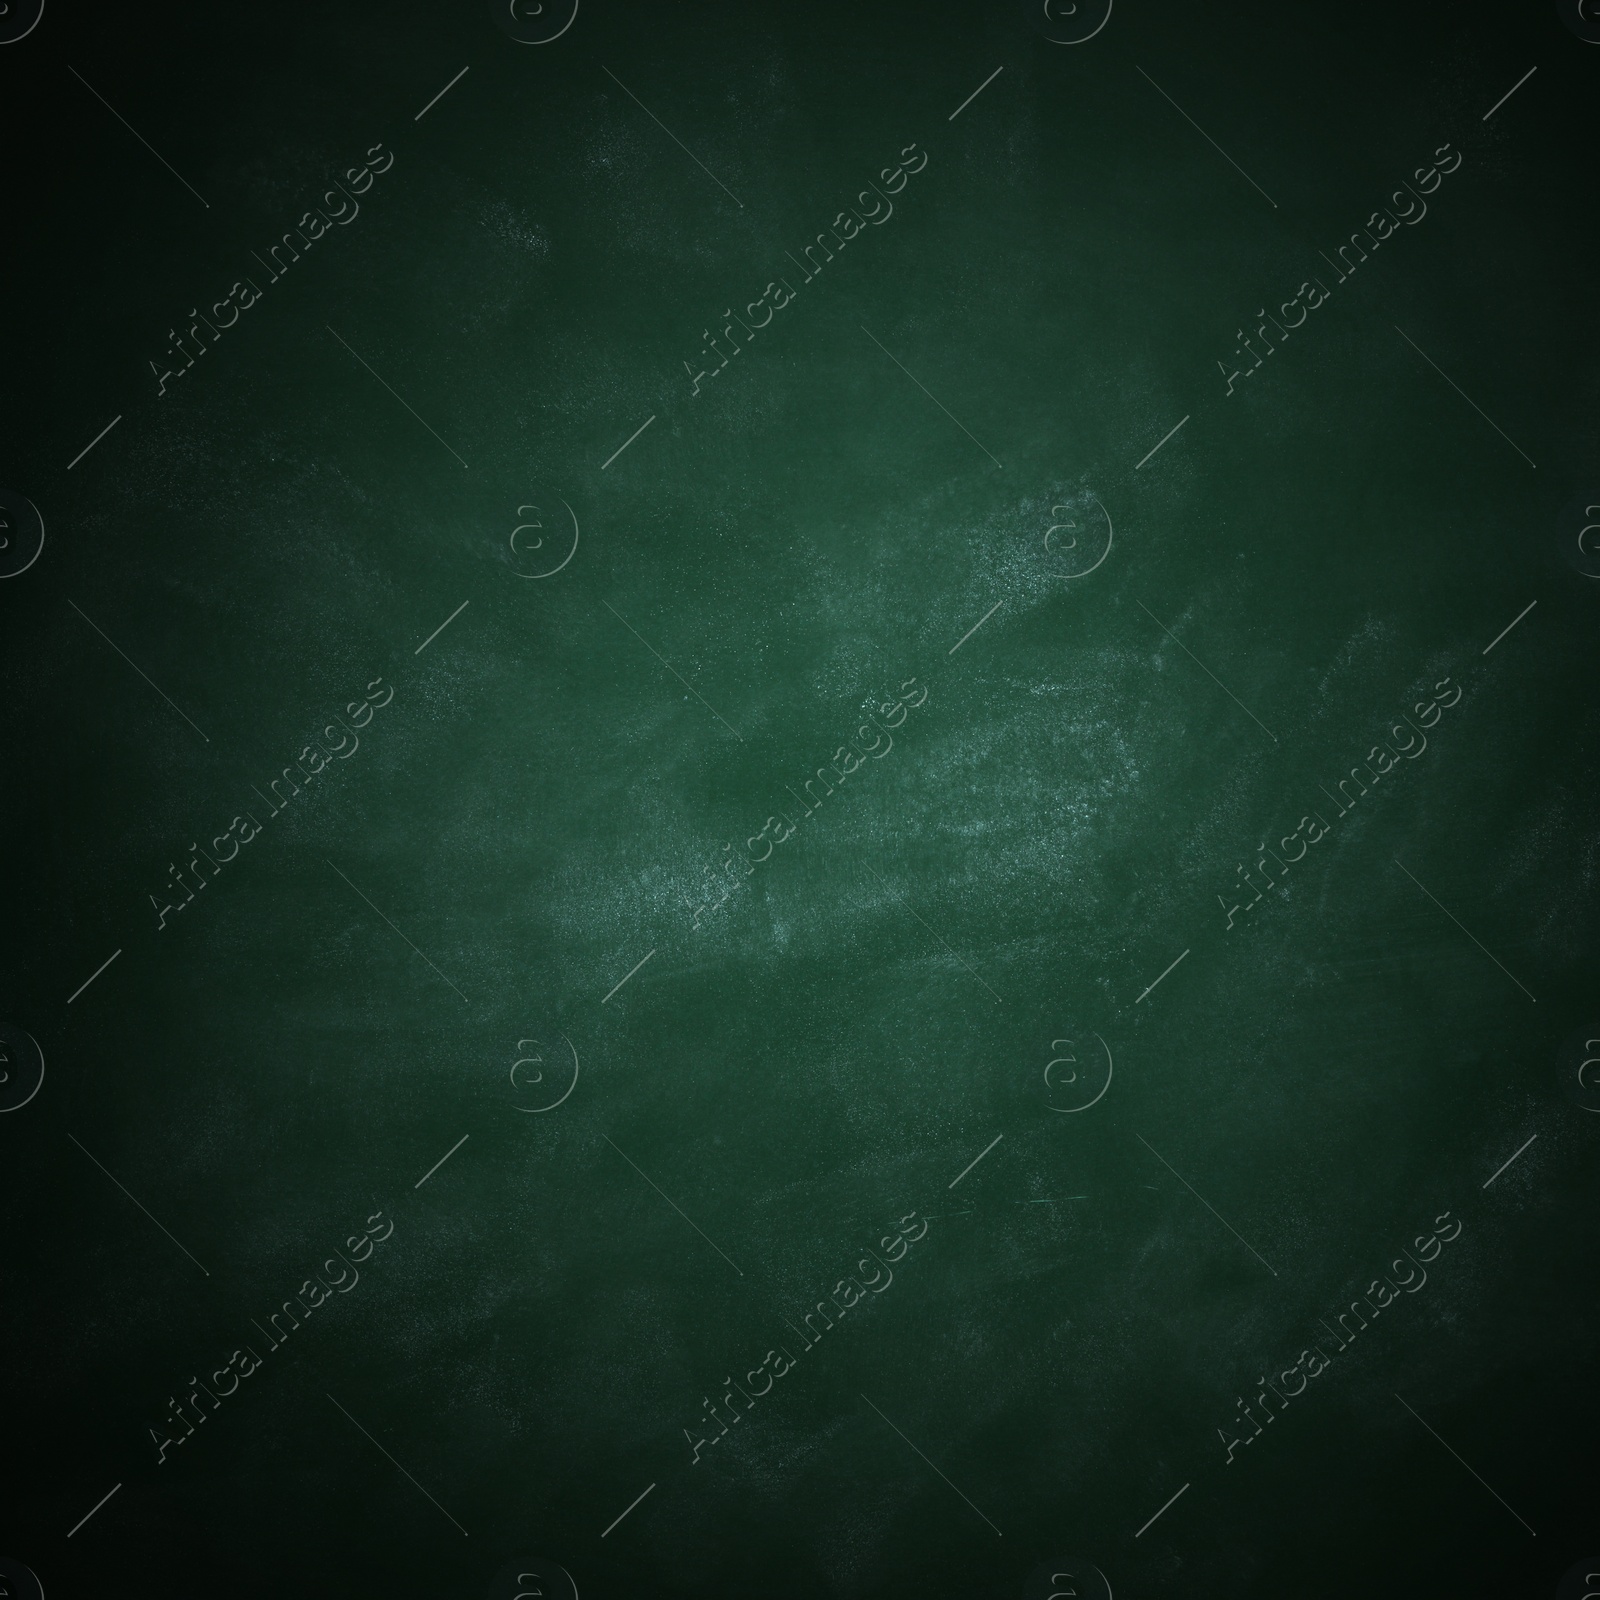 Image of Dirty green chalkboard as background. Vignette effect